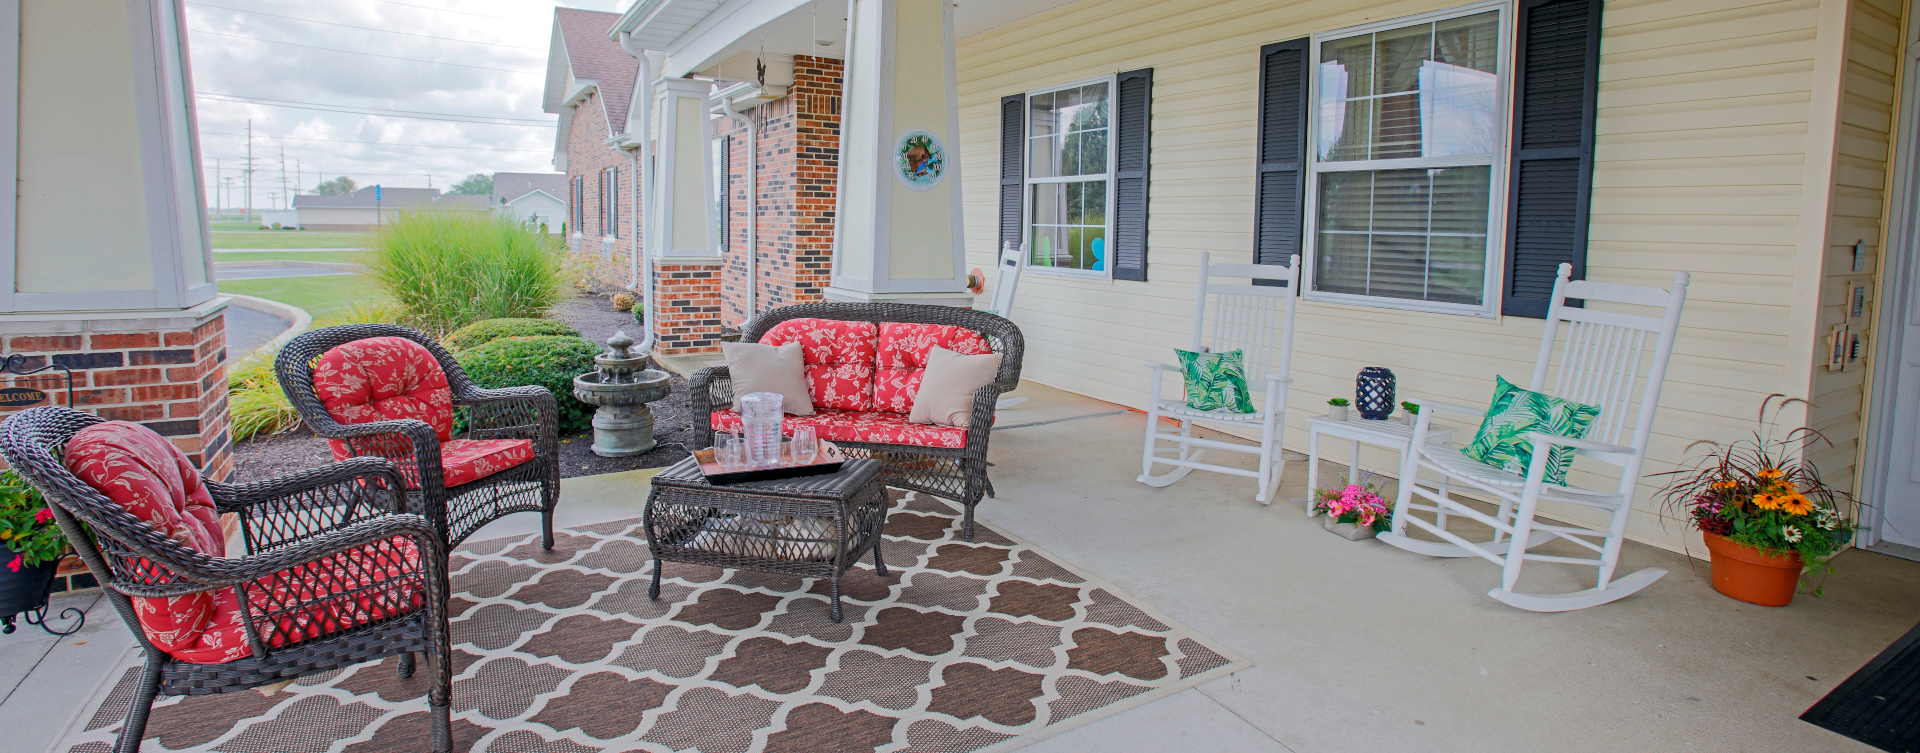 Relax in your favorite chair on the porch at Bickford of Wabash